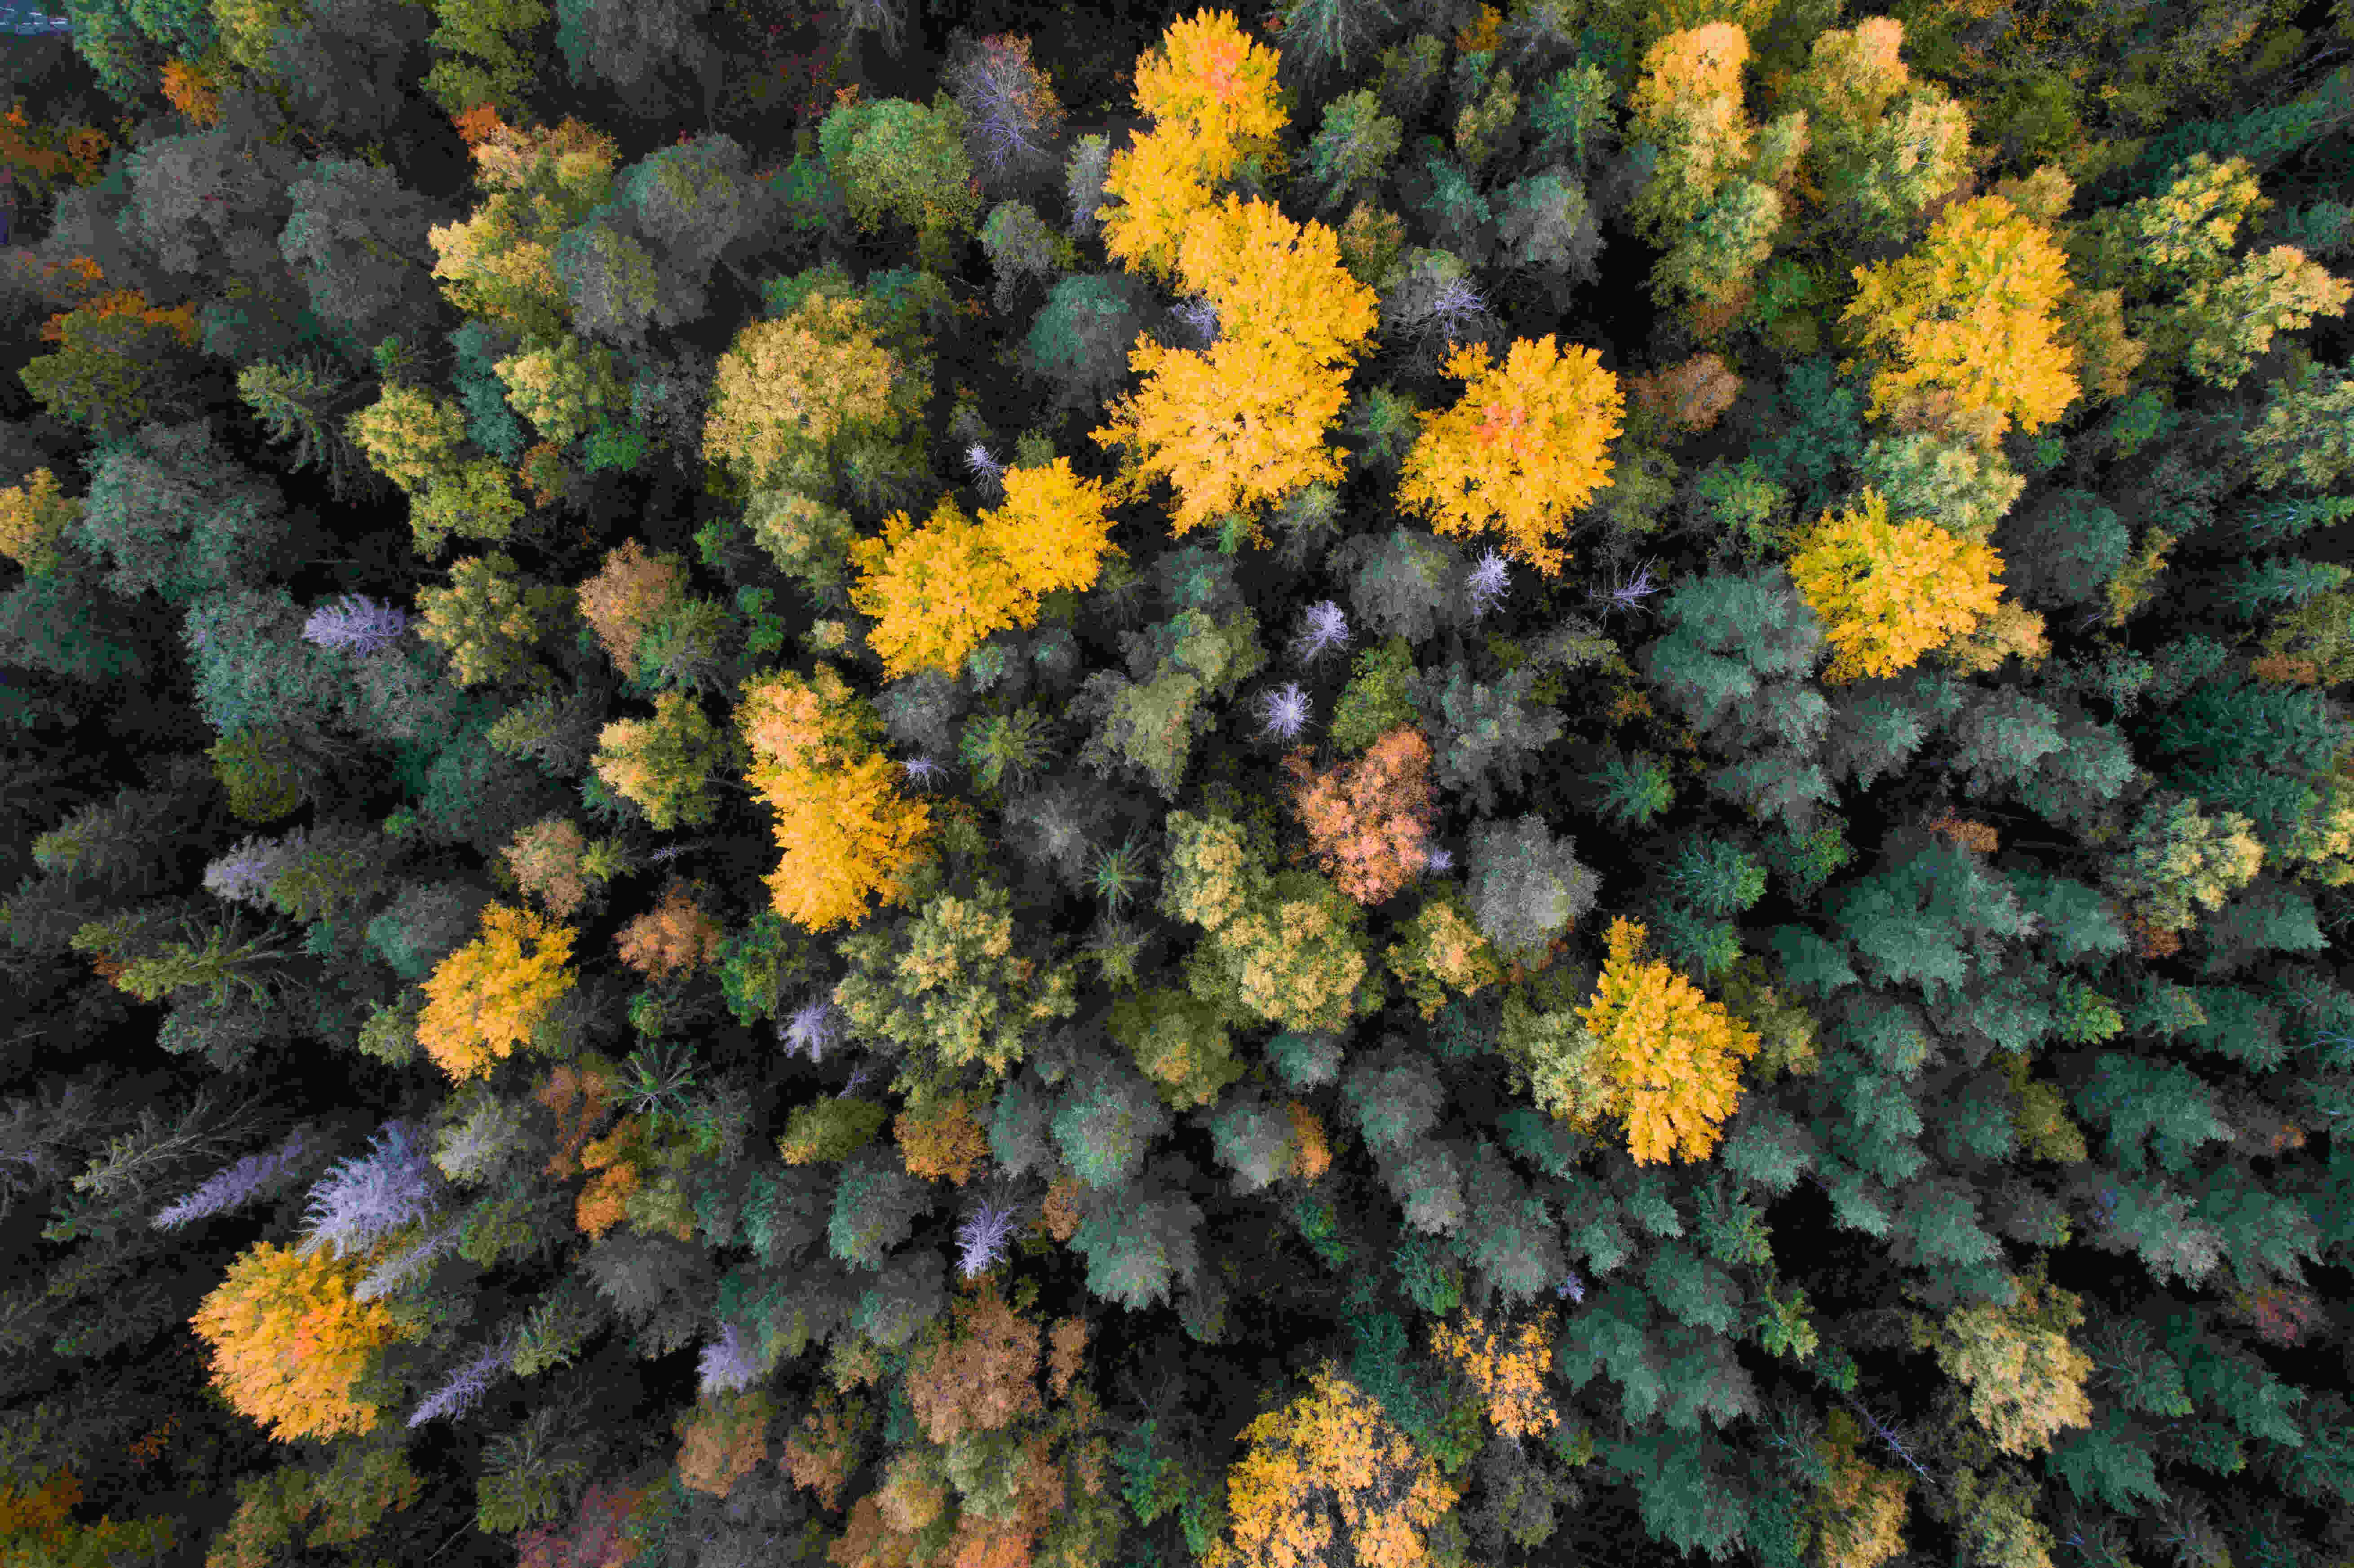 Aerial shot of the nordic boreal forest, with colors from dark green to bright yellow.